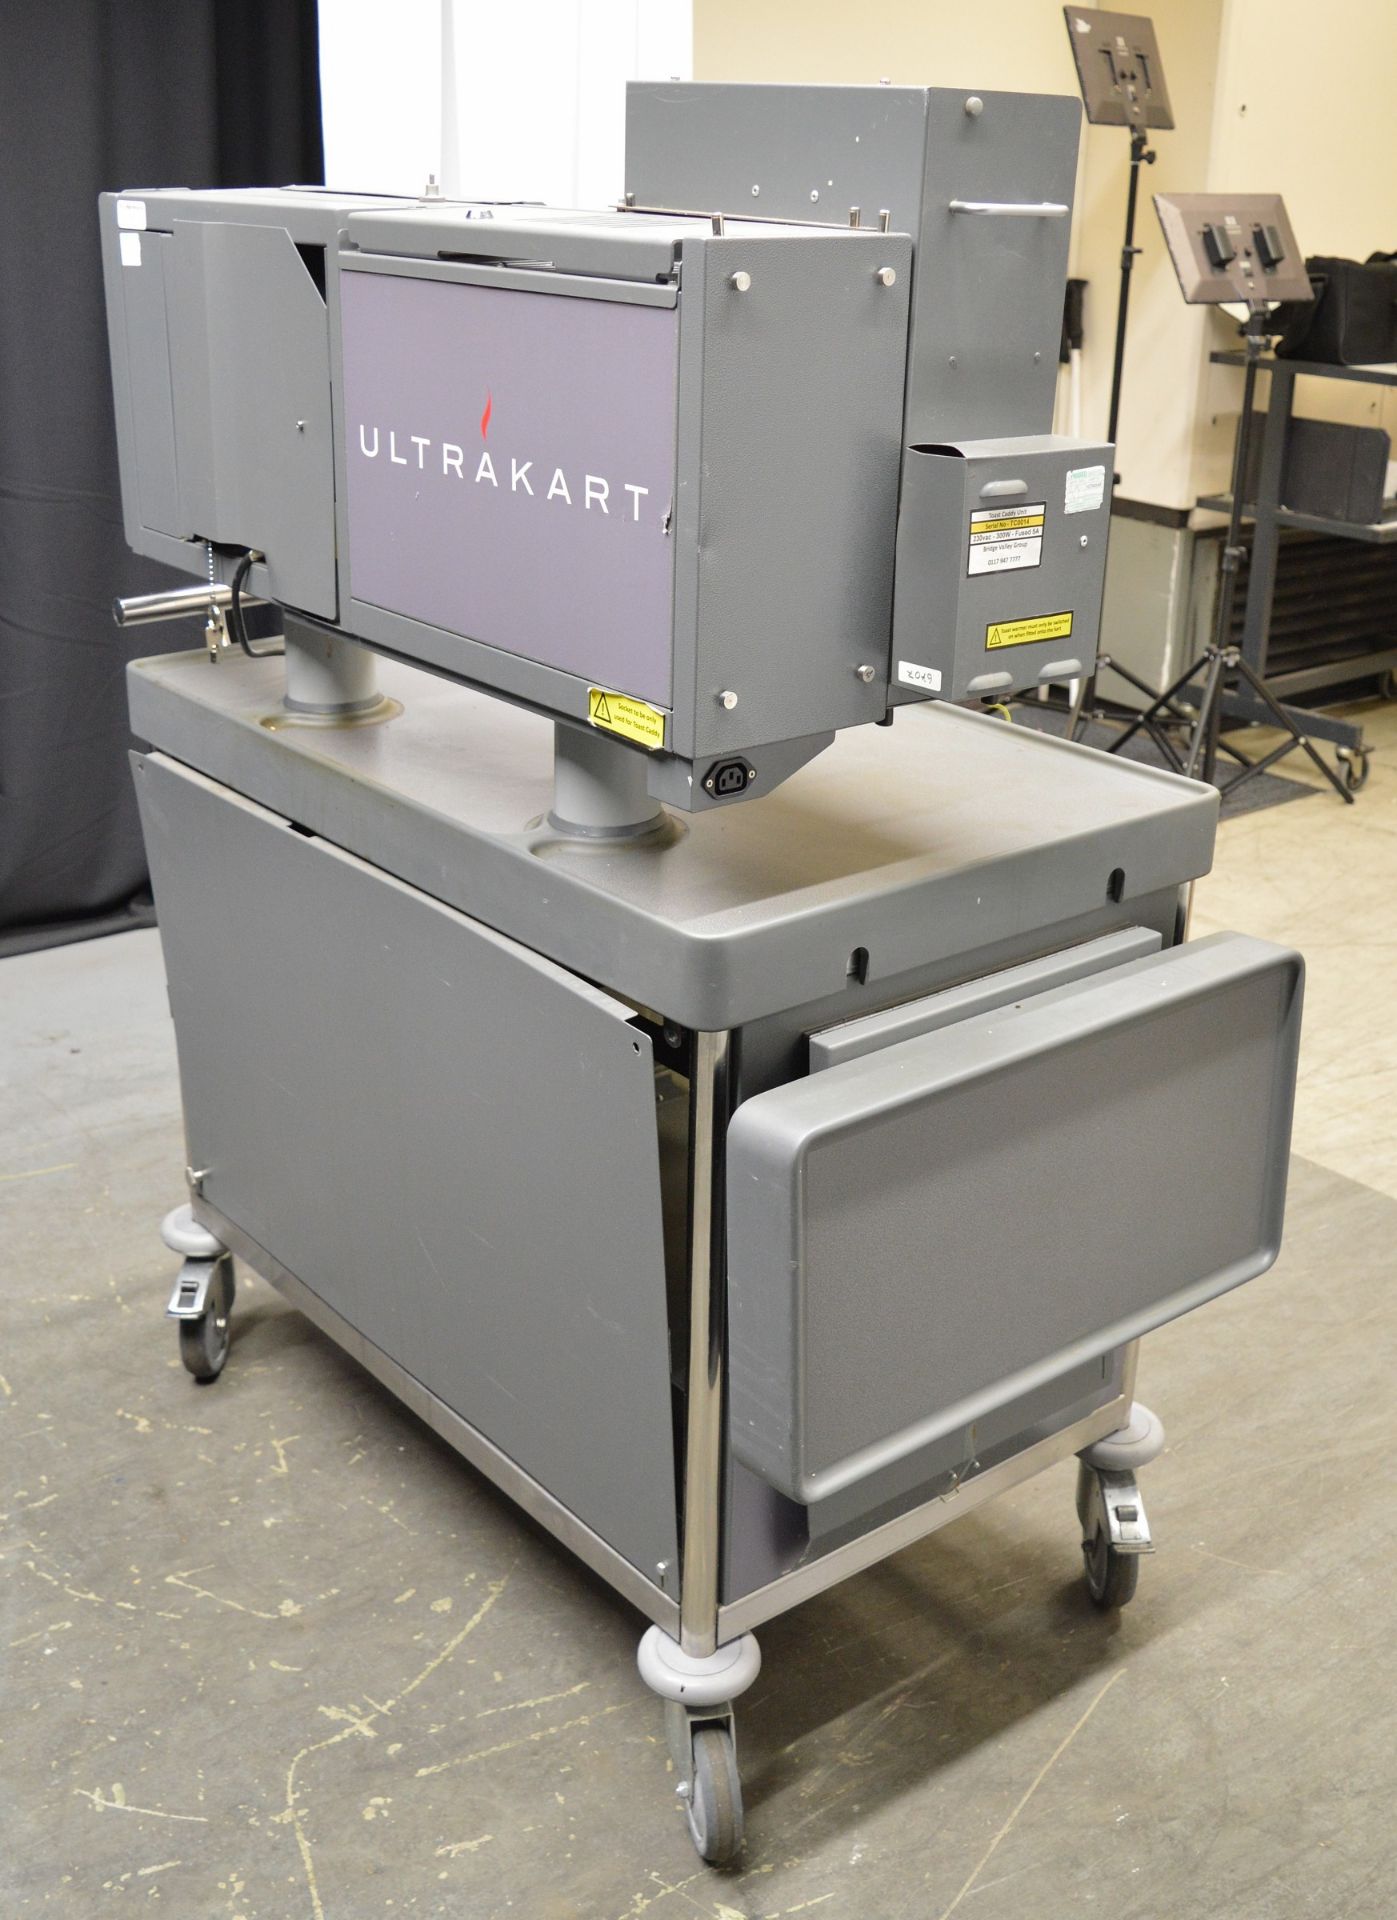 Ultracart Breakfast Bar Caddy Unit Trolley (damage to perspex on toast rack) - Image 10 of 11